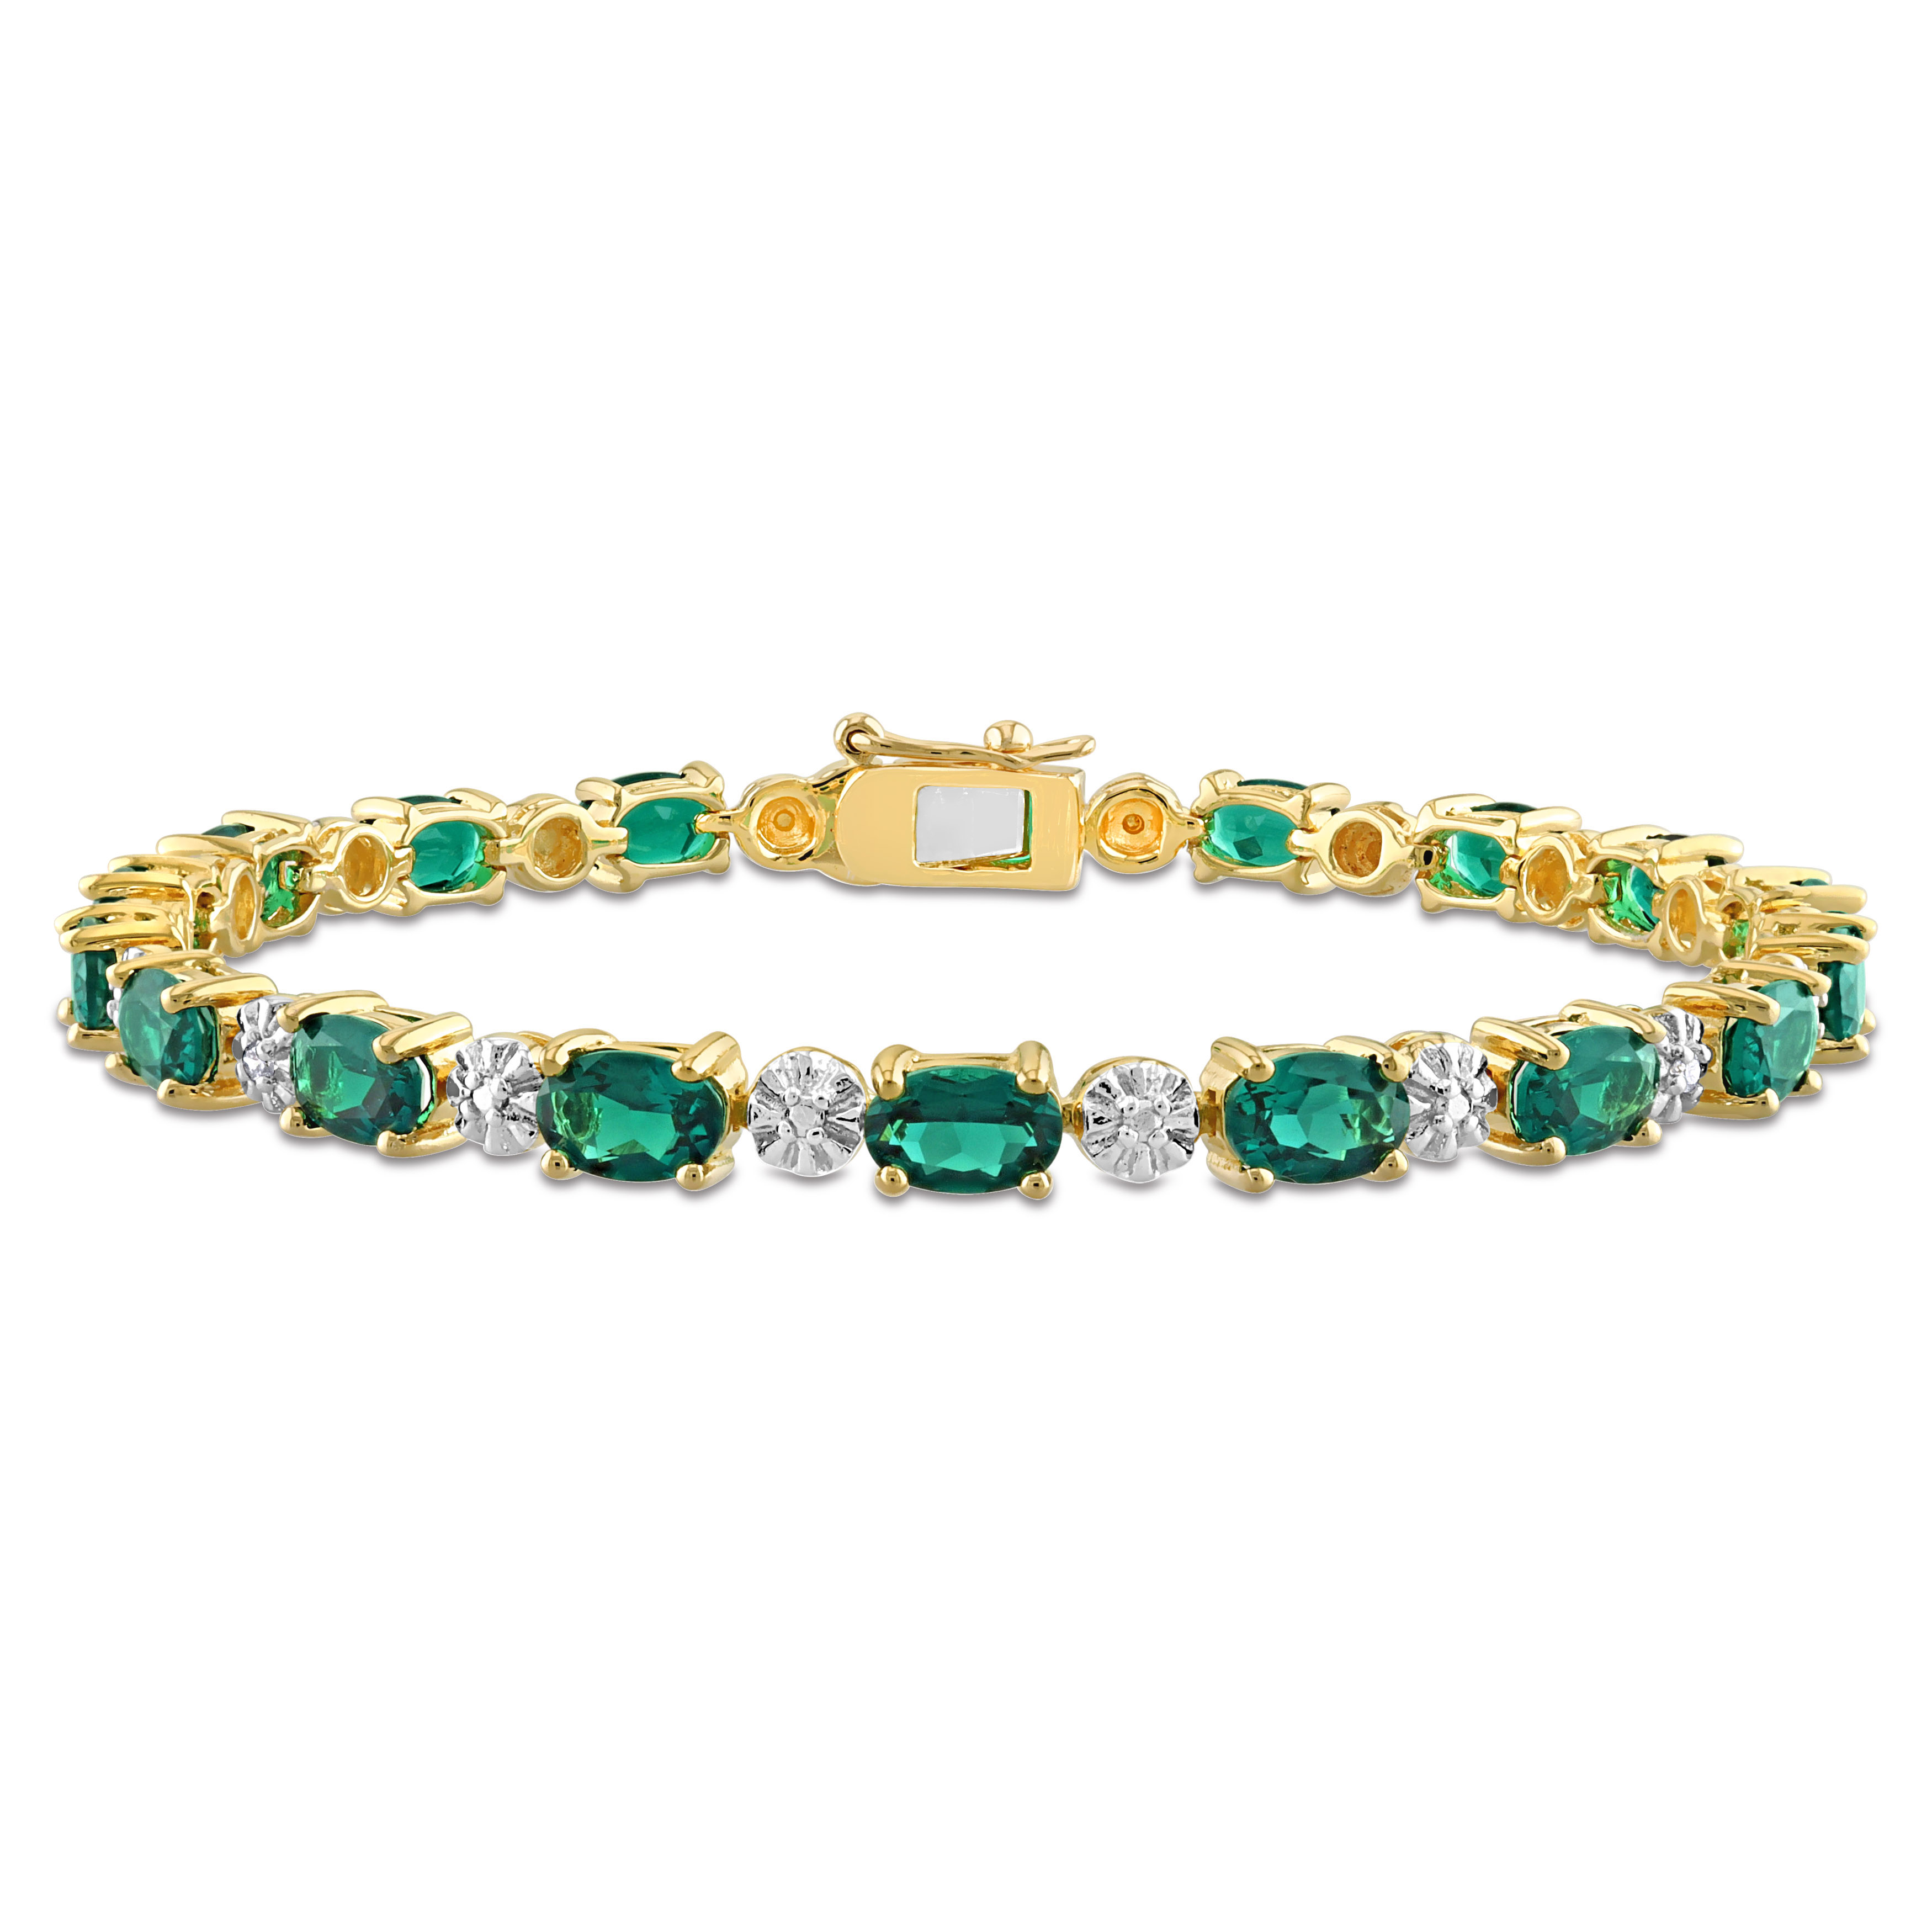 7 3/4 CT TGW Created Emerald and Diamond Bracelet in Yellow Plated Sterling Silver - 7.25 in.